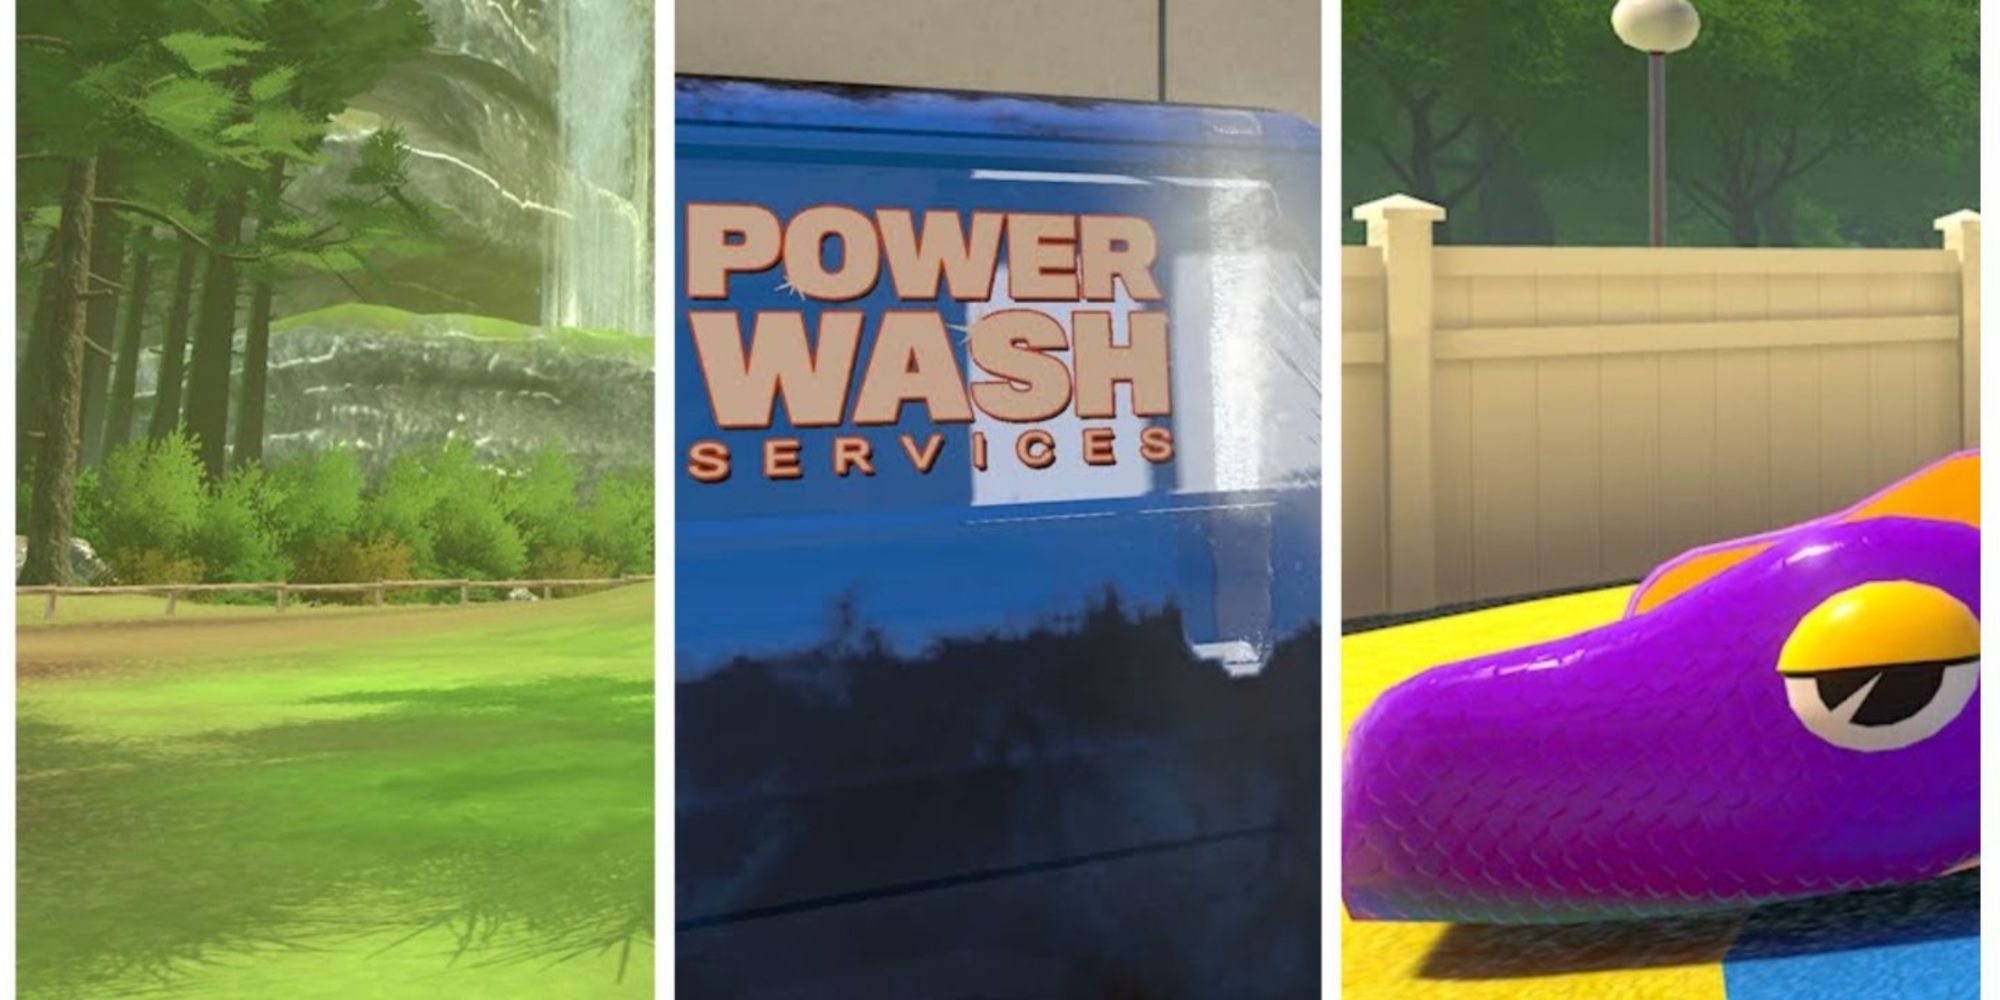 PowerWash Simulator 0.6: after the exteriors, we clean the interiors